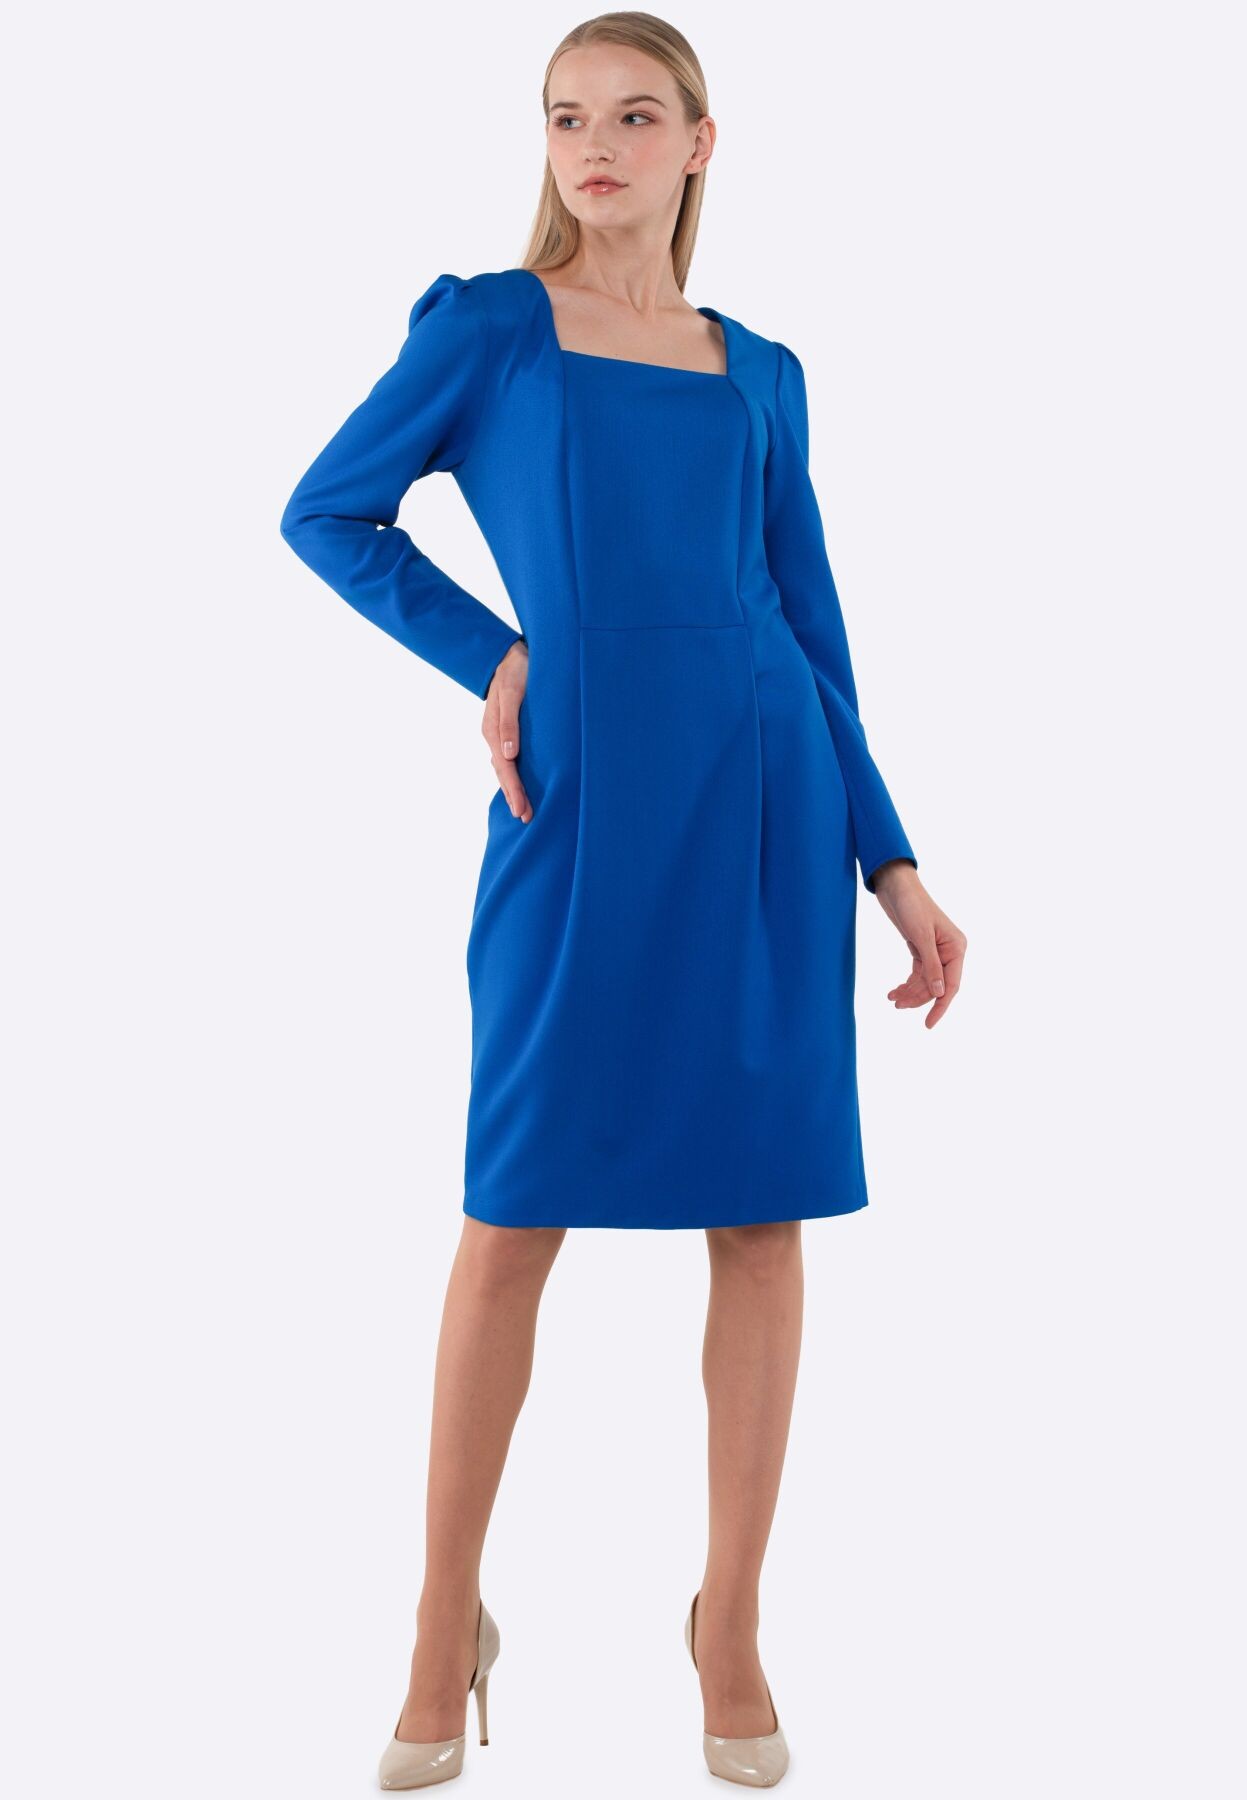 Elegant bright blue dress with long sleeves 5663